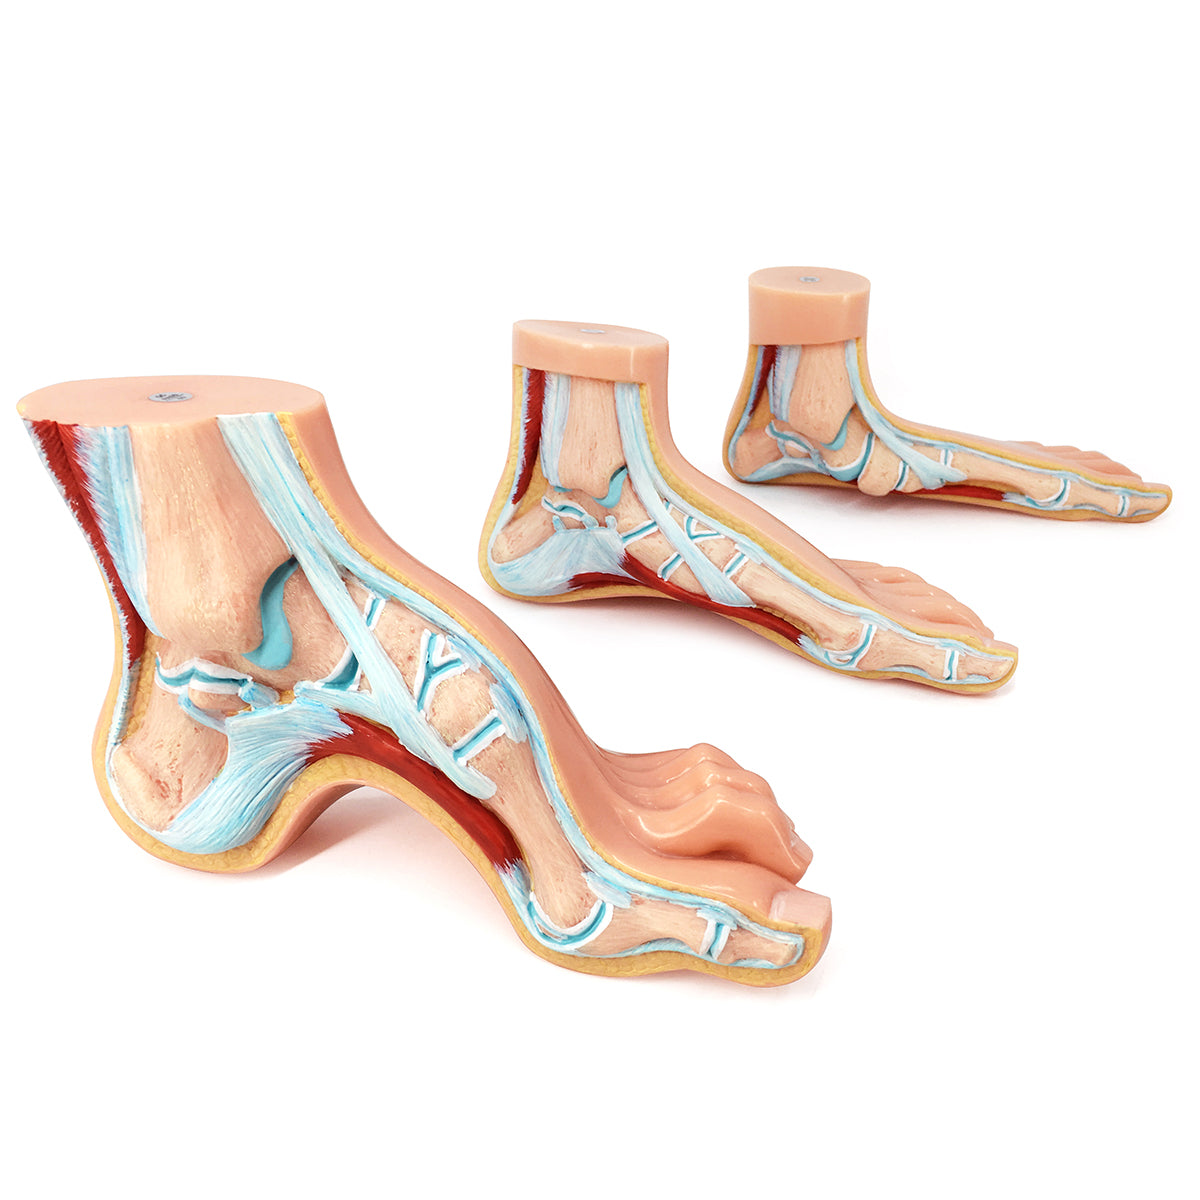 Evotech Scientific Podiatry Anatomy Models, Set of 3 Human Feet Flat Foot, Normal Foot and a High Arch